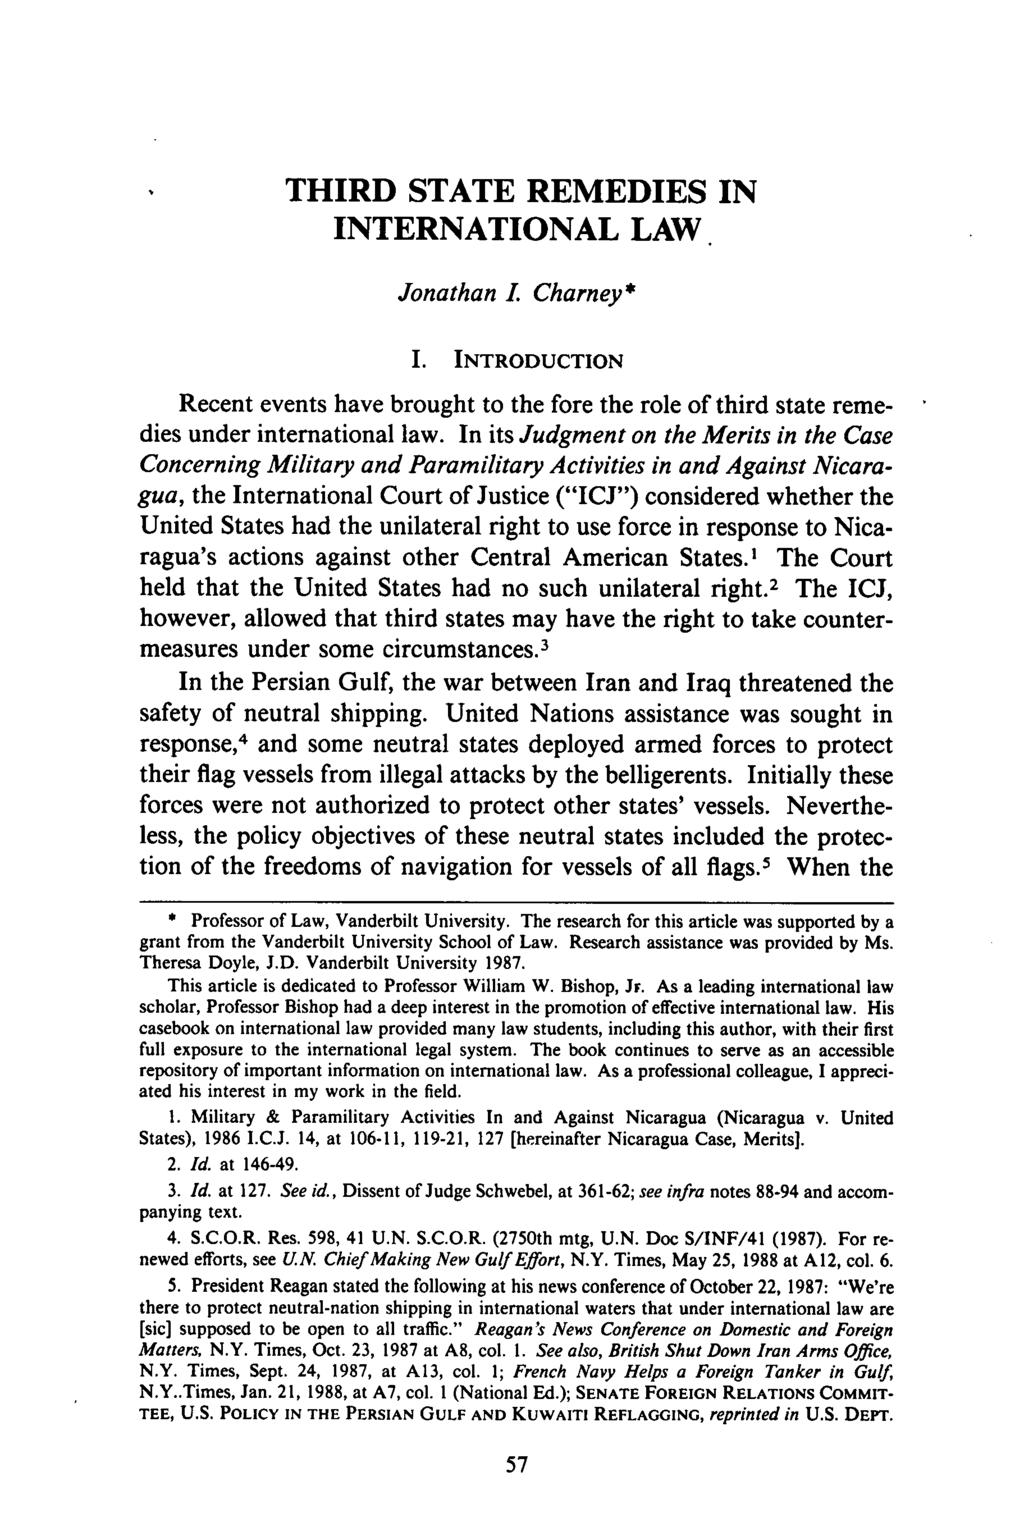 THIRD STATE REMEDIES IN INTERNATIONAL LAW. Jonathan L Charney* I. INTRODUCTION Recent events have brought to the fore the role of third state remedies under international law.